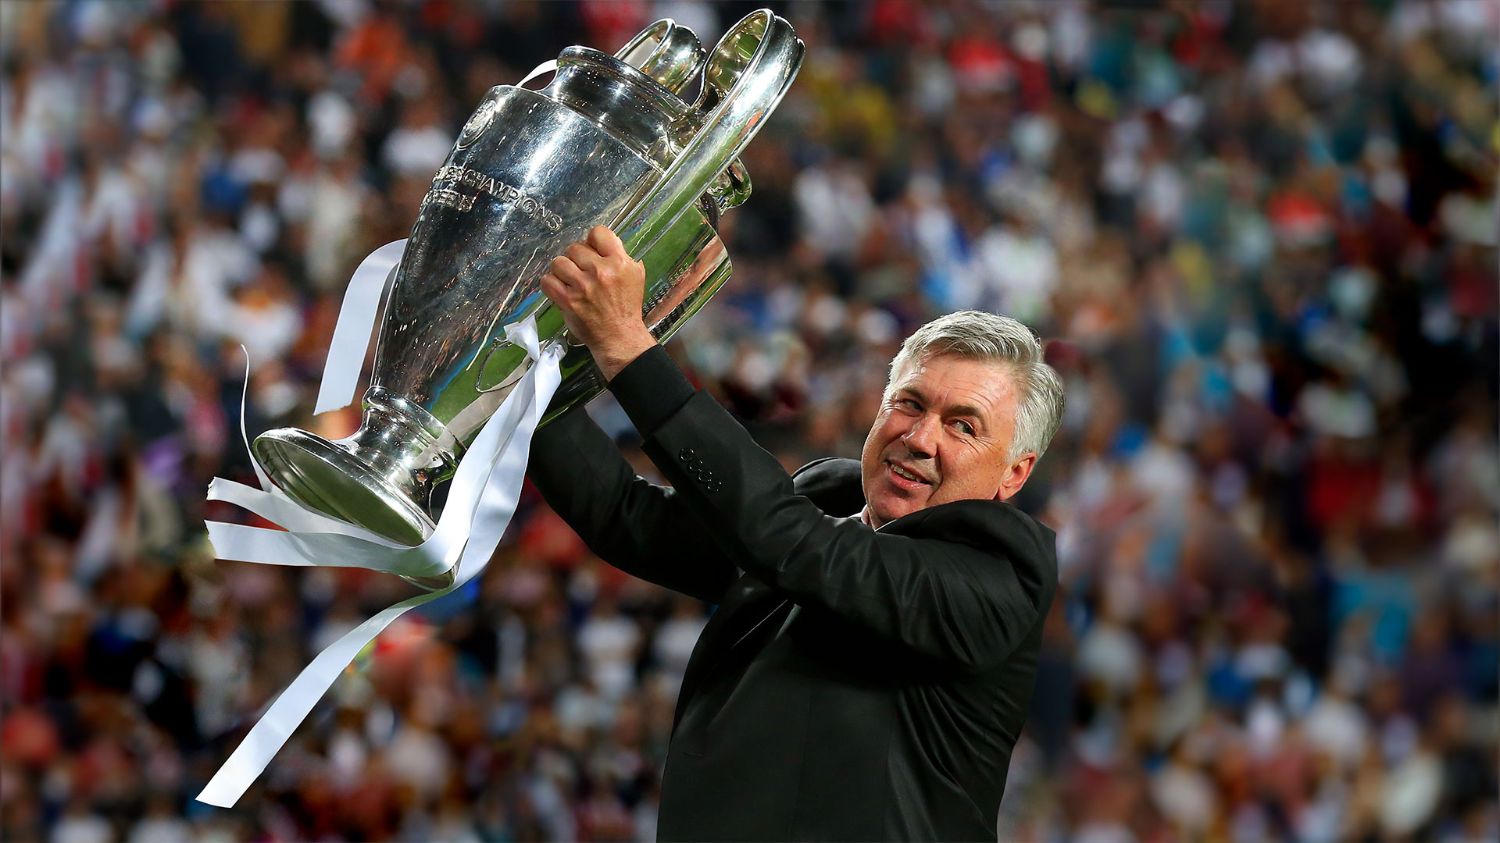  Carlo Ancelotti celebrates with Real Madrid players after winning the 2014 Champions League.